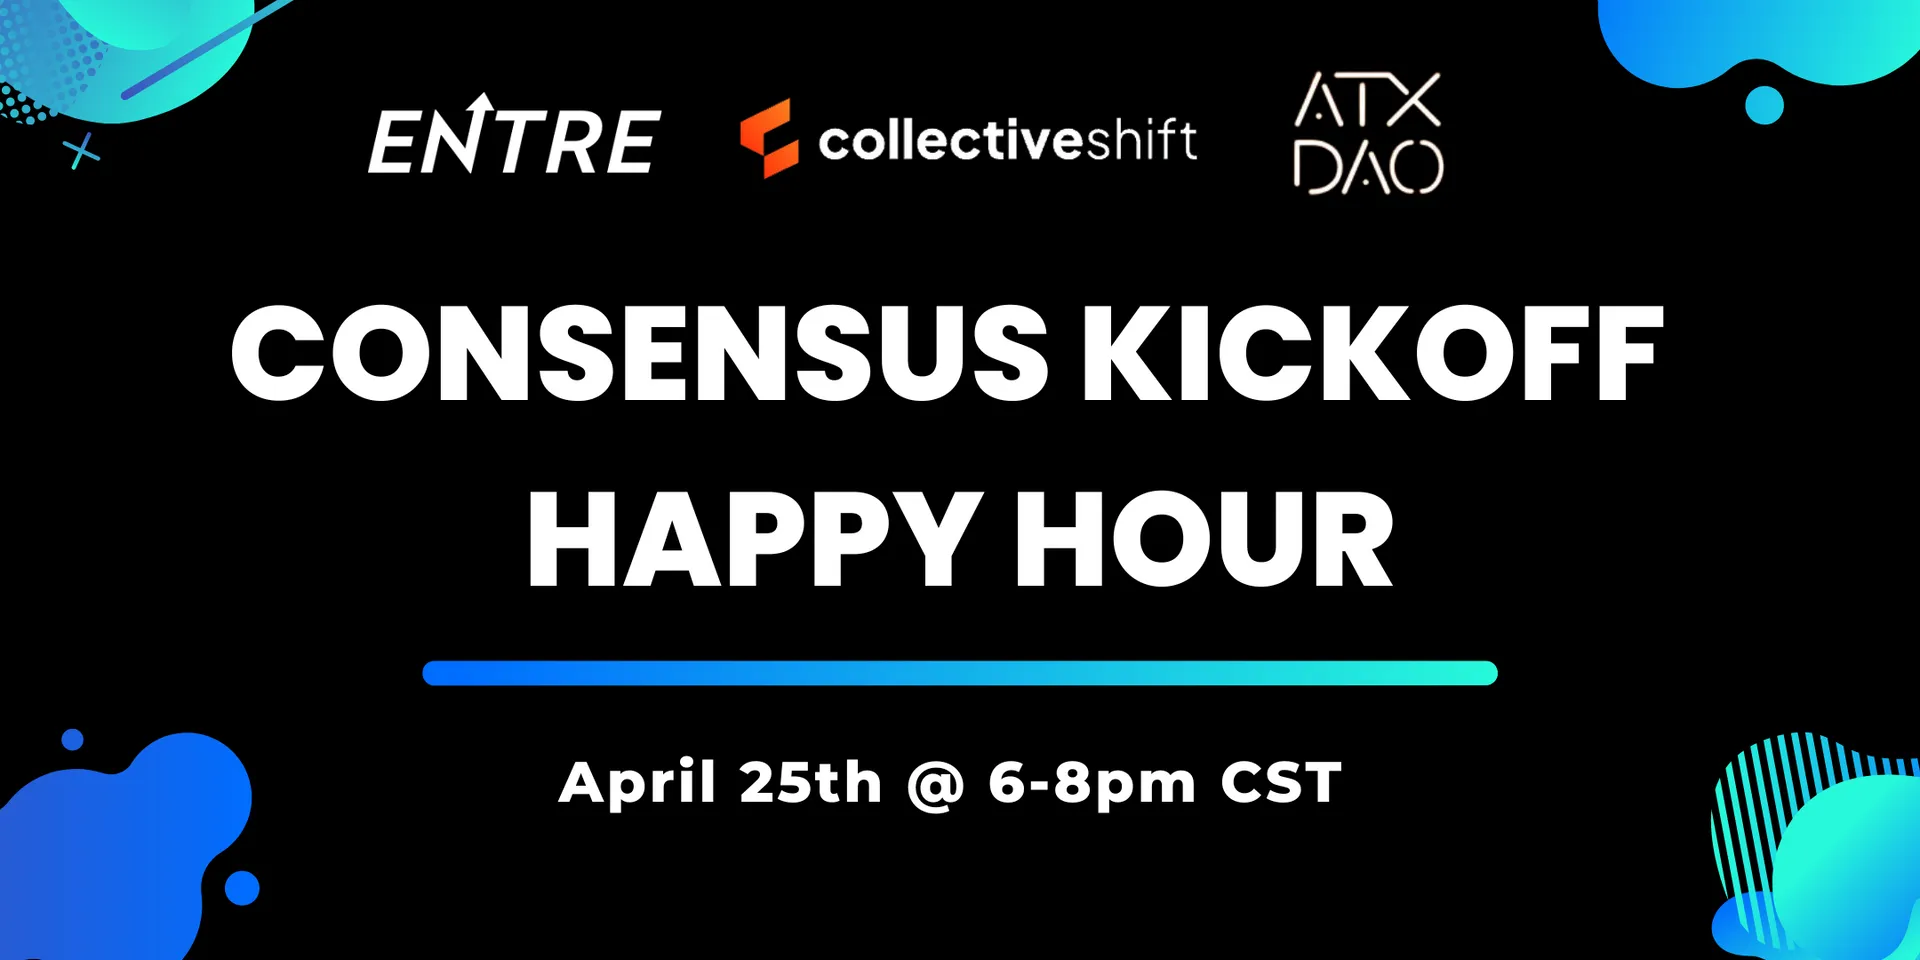 Consensus Kickoff Happy Hour 🥳

Tuesday April 25th at 6pm CT ⏰

Join here 👉 entre.link/HappyHour